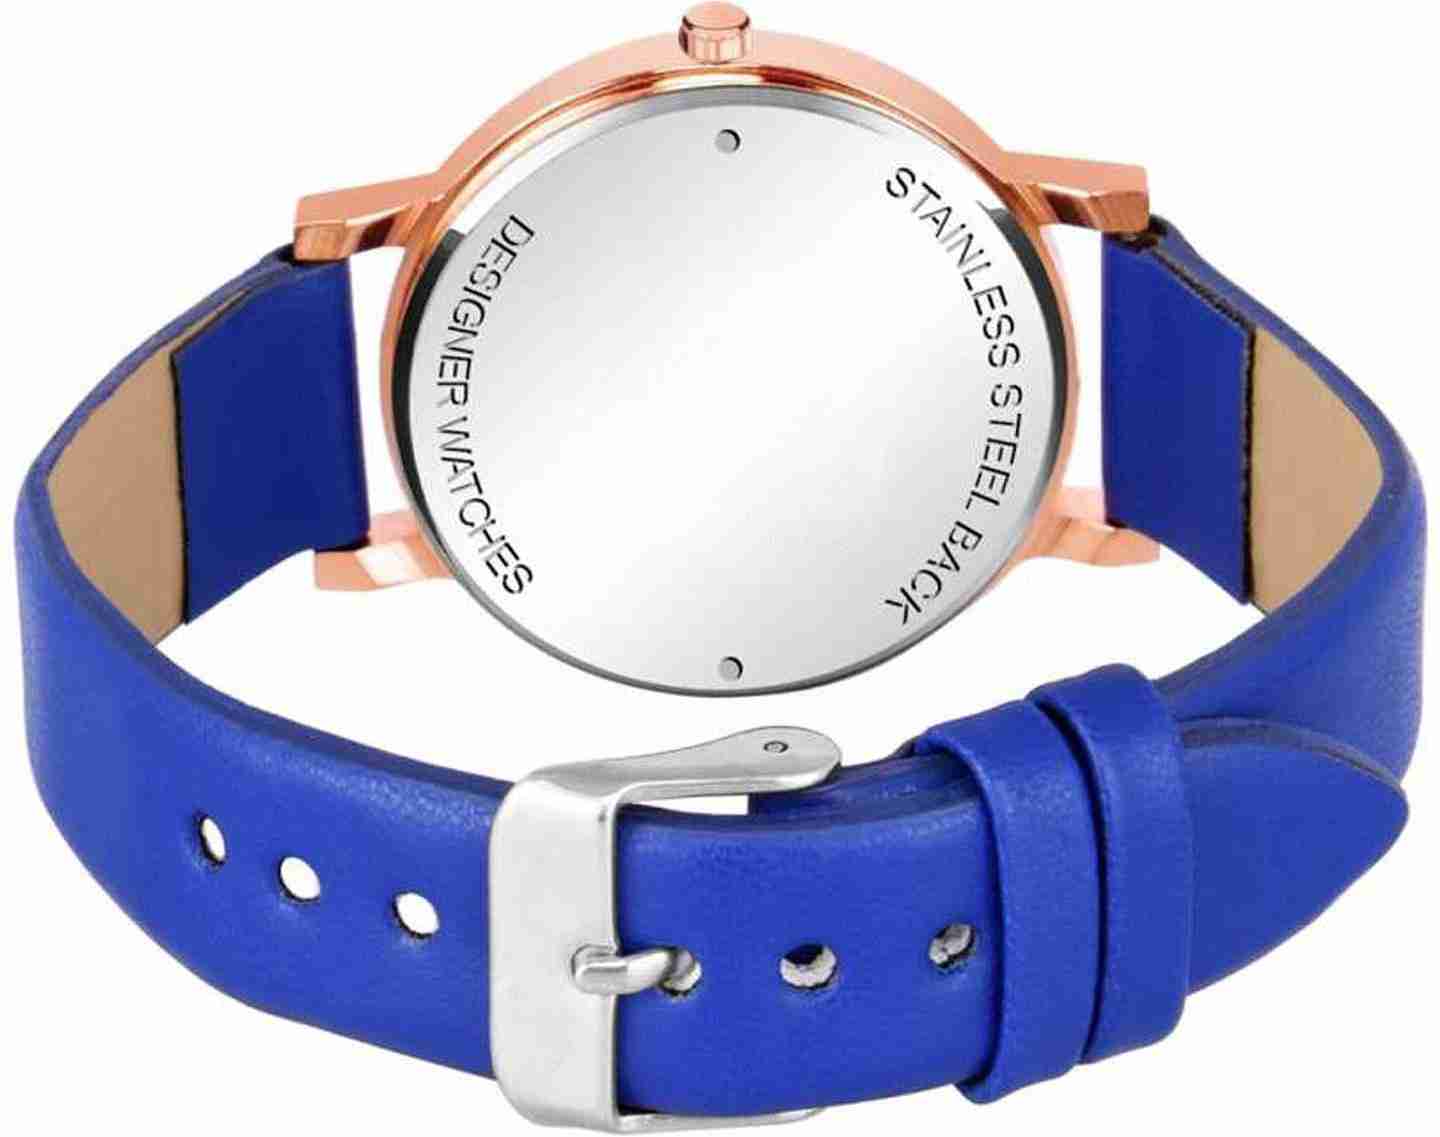 Synthetic Leather Analog Quartz Sports Watch Water Resistant Blue Colour